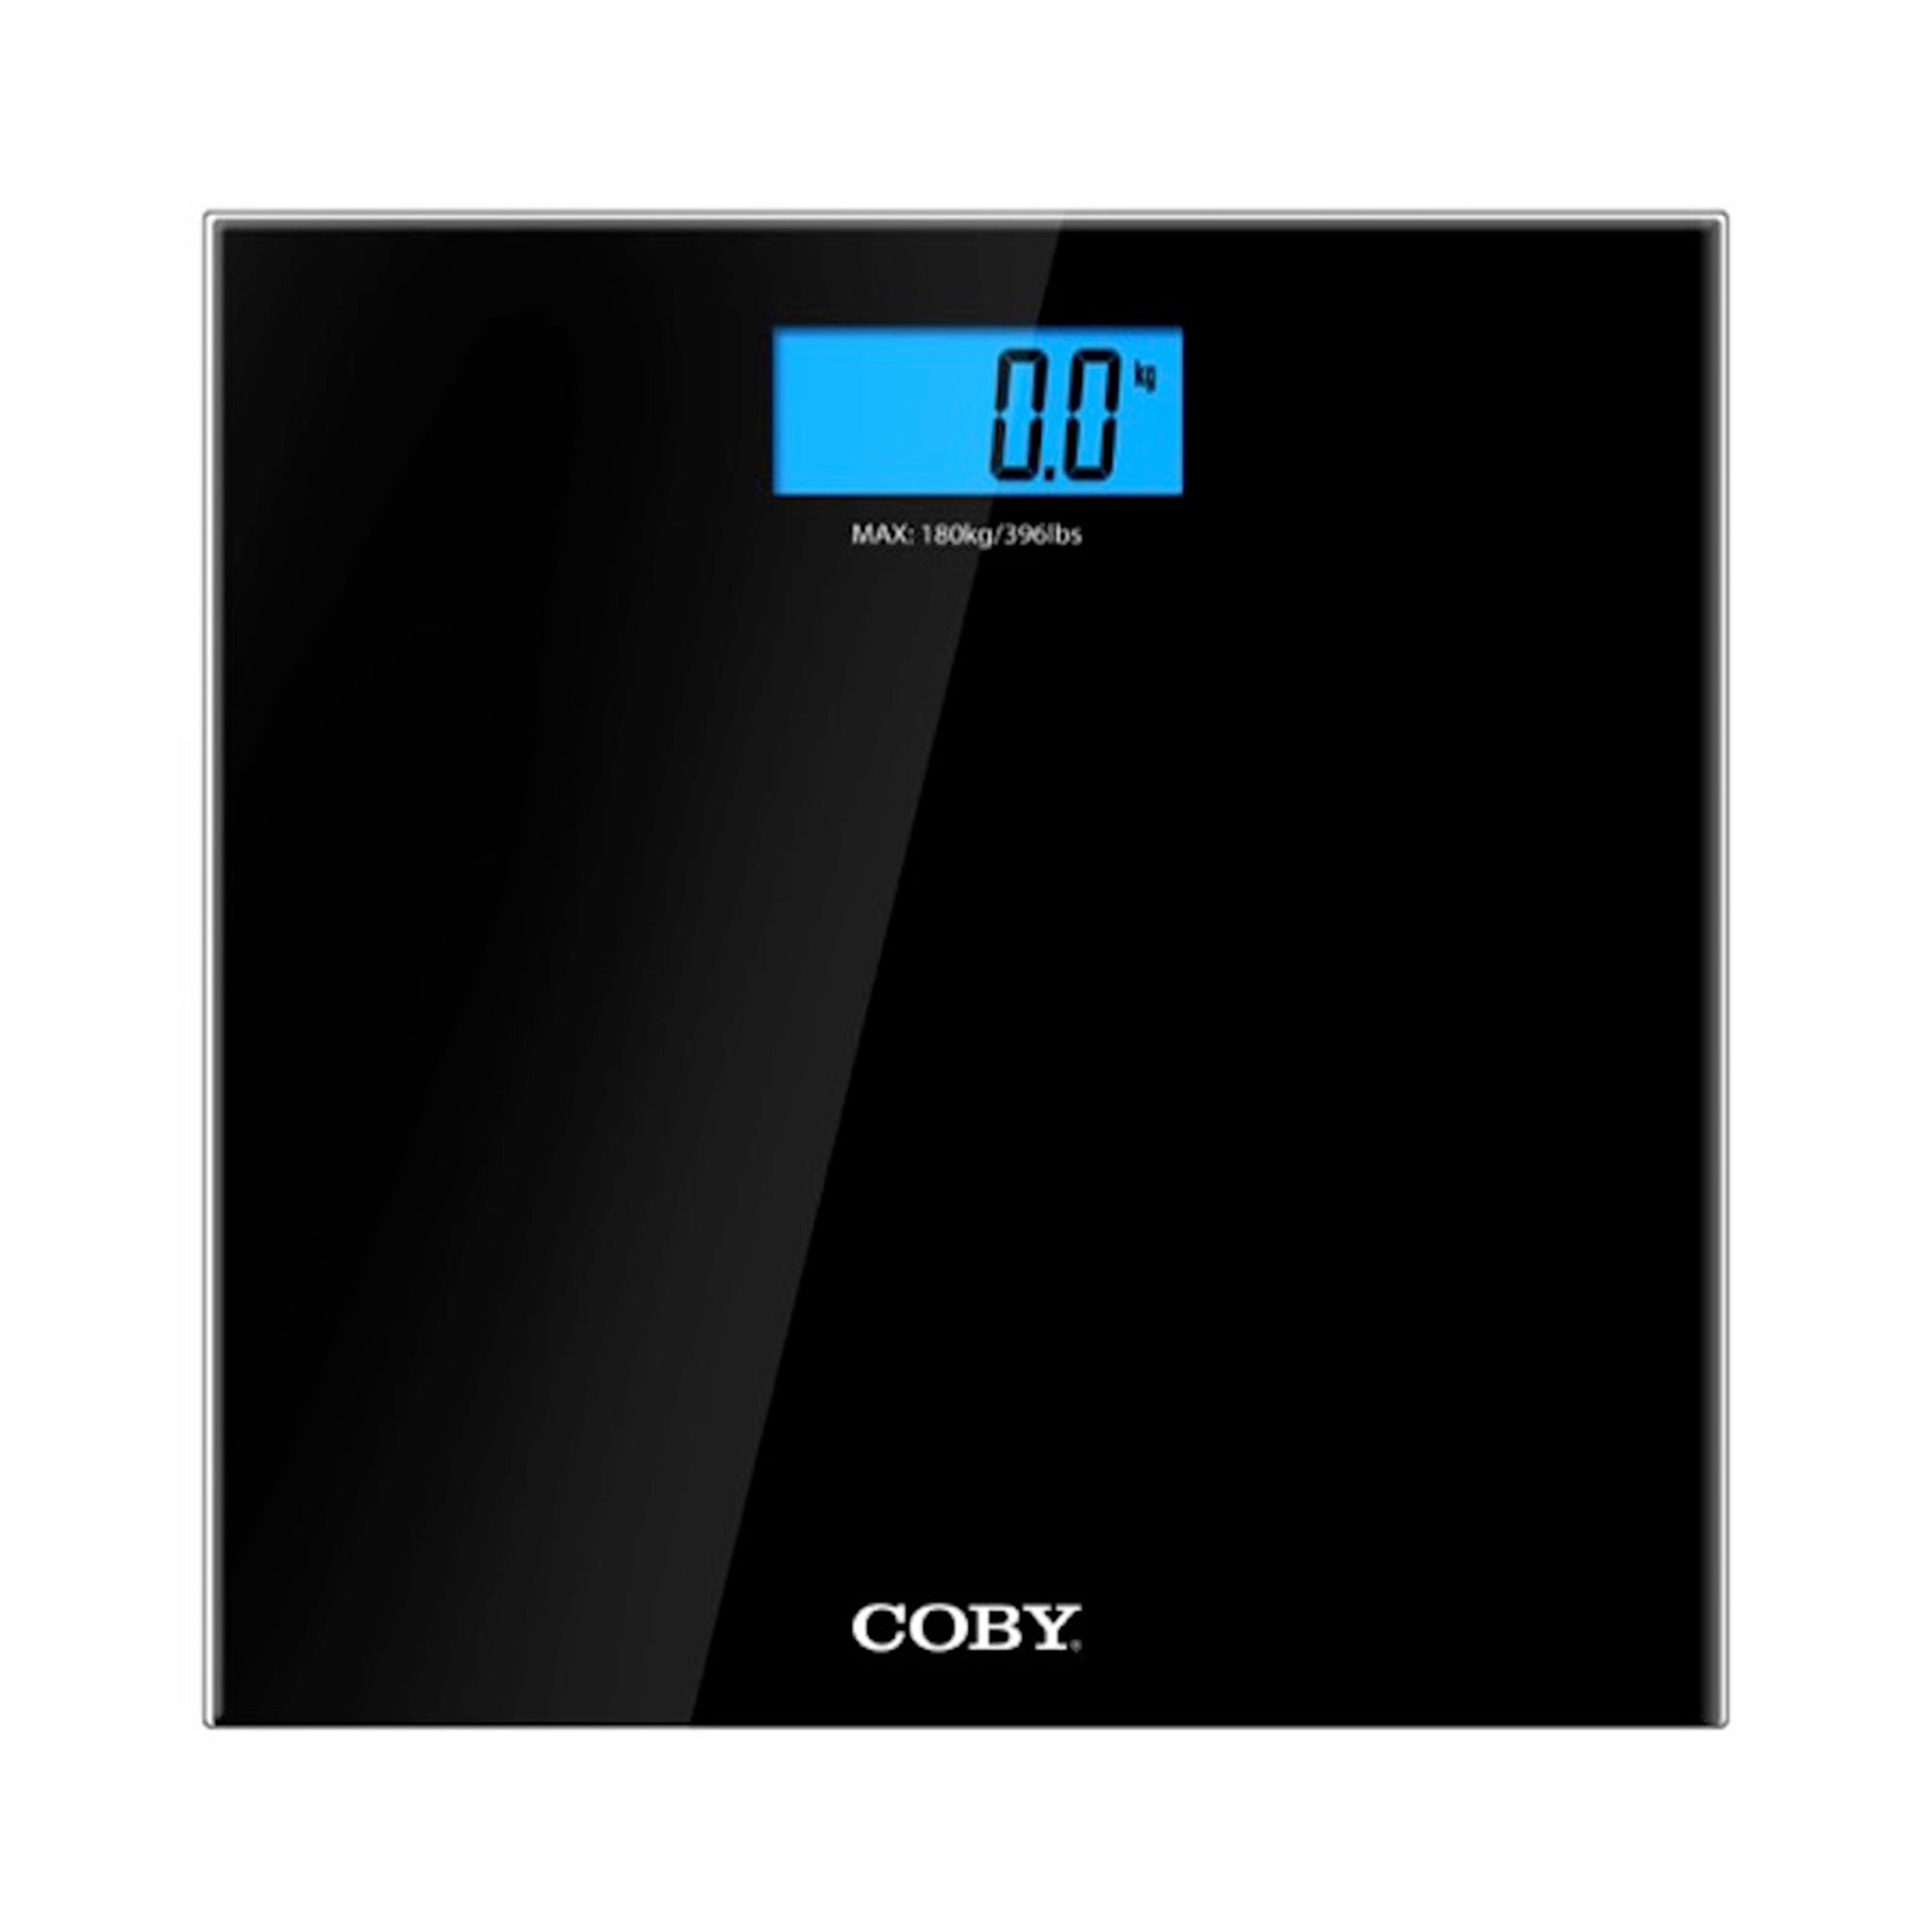 COBY Glass Digital Scale with Blue LCD Display